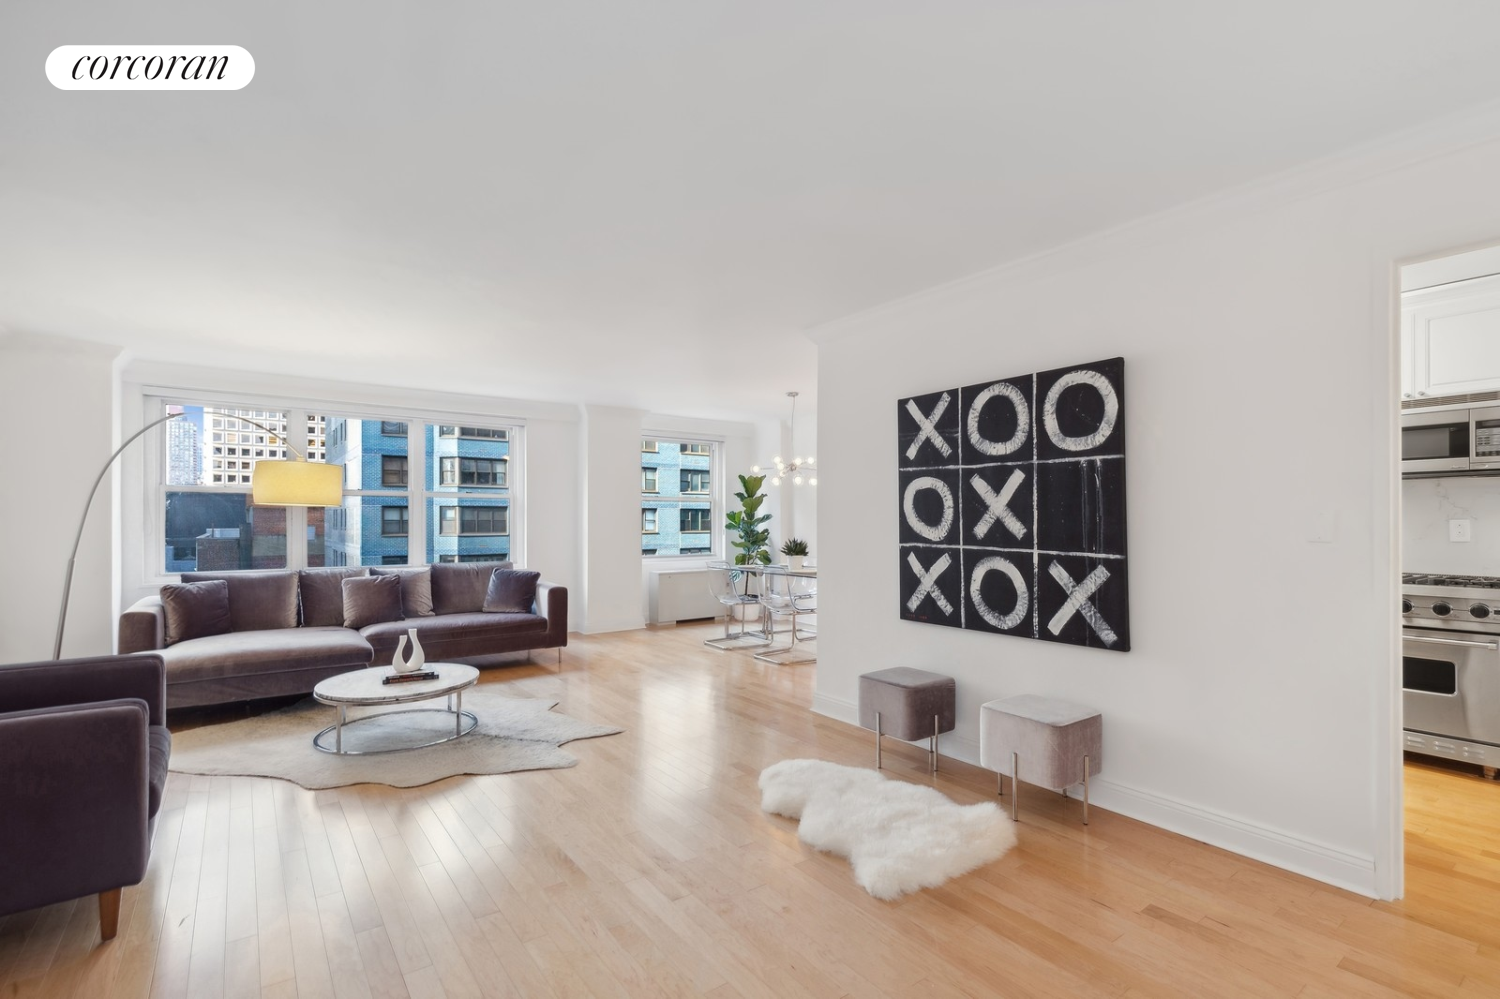 225 East 57th Street 9D, Sutton, Midtown East, NYC - 2 Bedrooms  
2 Bathrooms  
5 Rooms - 